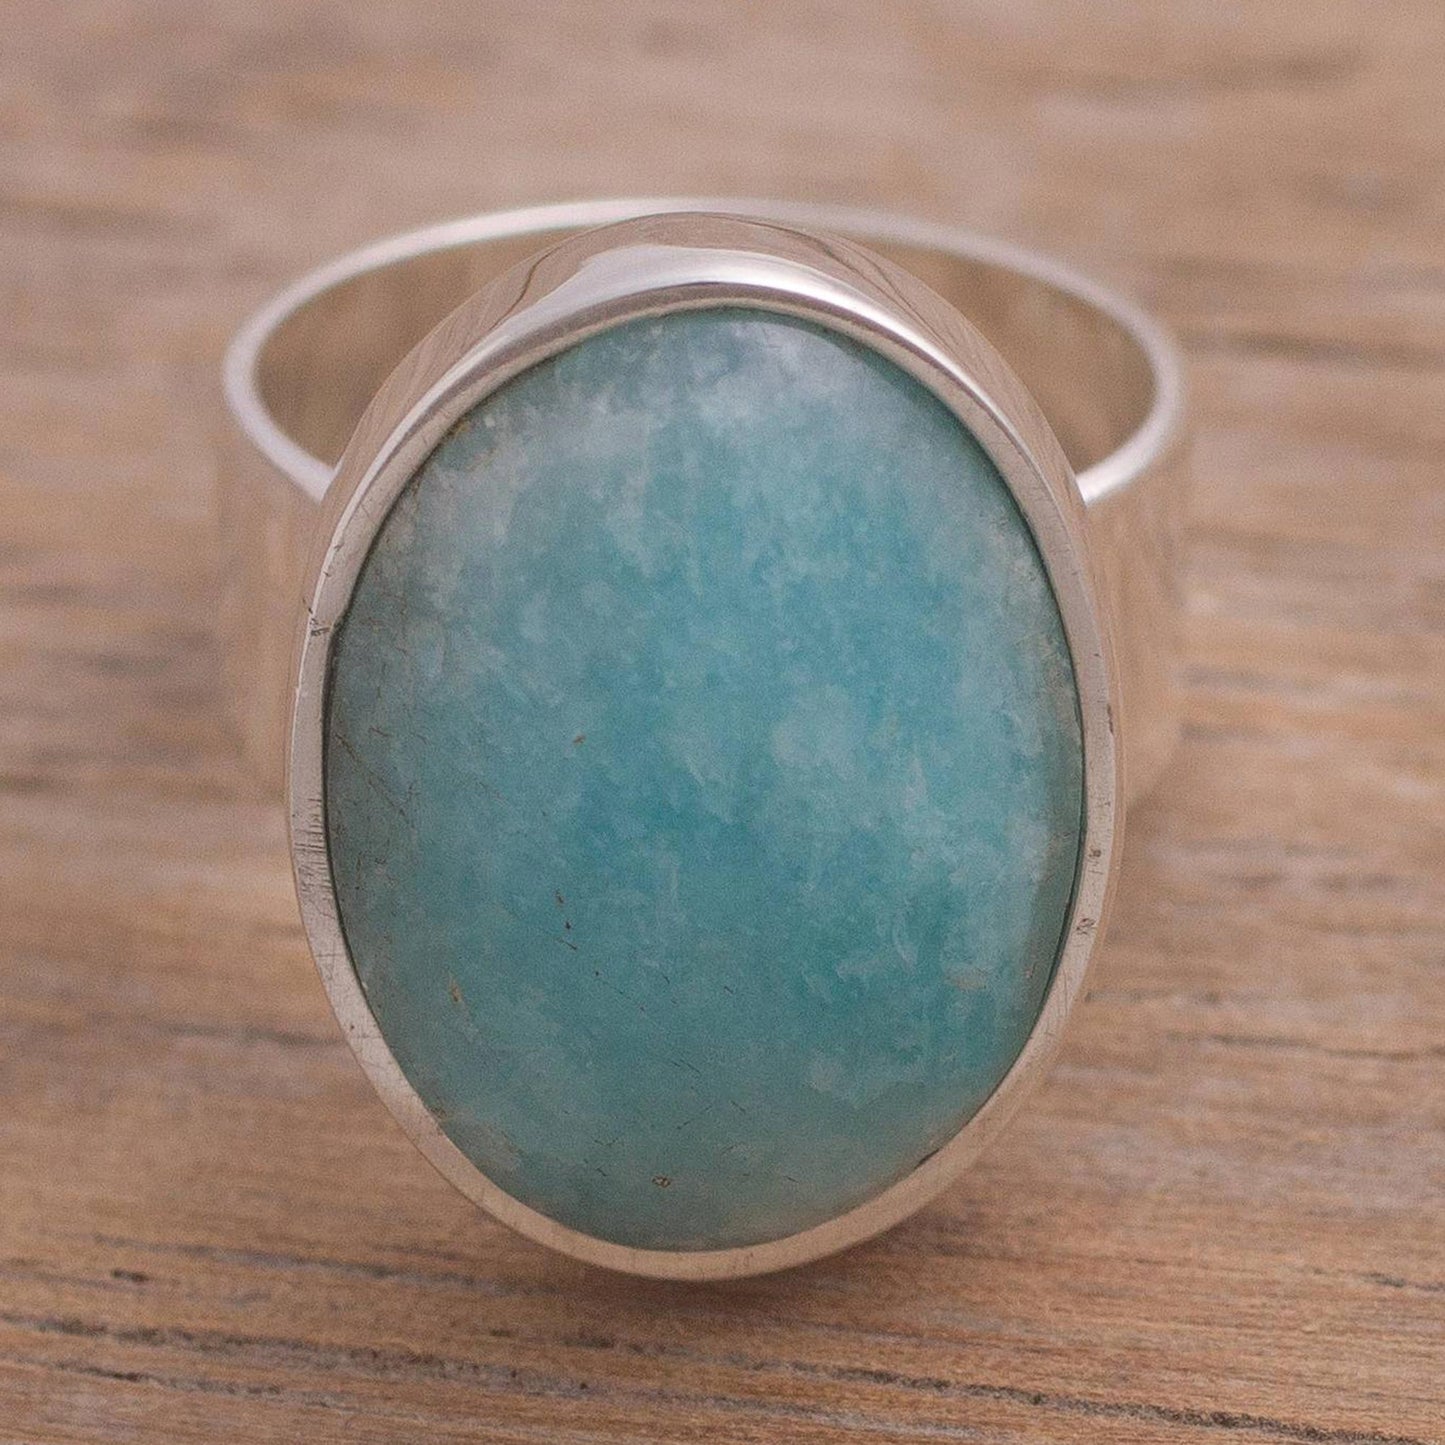 Amazonite Encounter Hand Made Peruvian Sterling Silver Amazonite Cocktail Ring